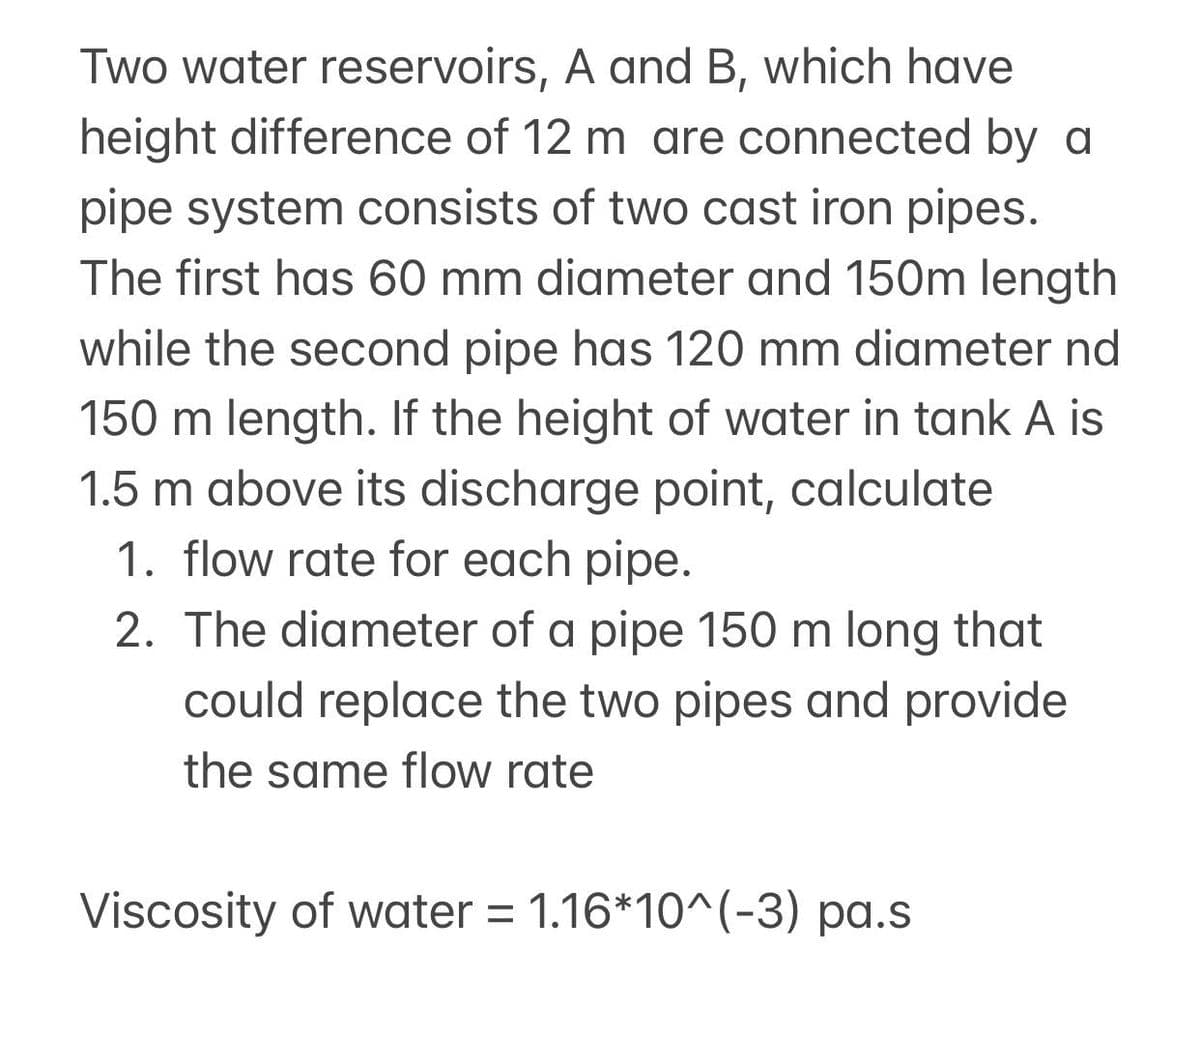 Two water reservoirs, A and B, which have
height difference of 12 m are connected by a
pipe system consists of two cast iron pipes.
The first has 60 mm diameter and 150m length
while the second pipe has 120 mm diameter nd
150 m length. If the height of water in tank A is
1.5 m above its discharge point, calculate
1. flow rate for each pipe.
2. The diameter of a pipe 150 m long that
could replace the two pipes and provide
the same flow rate
Viscosity of water = 1.16*10^(-3) pa.s
